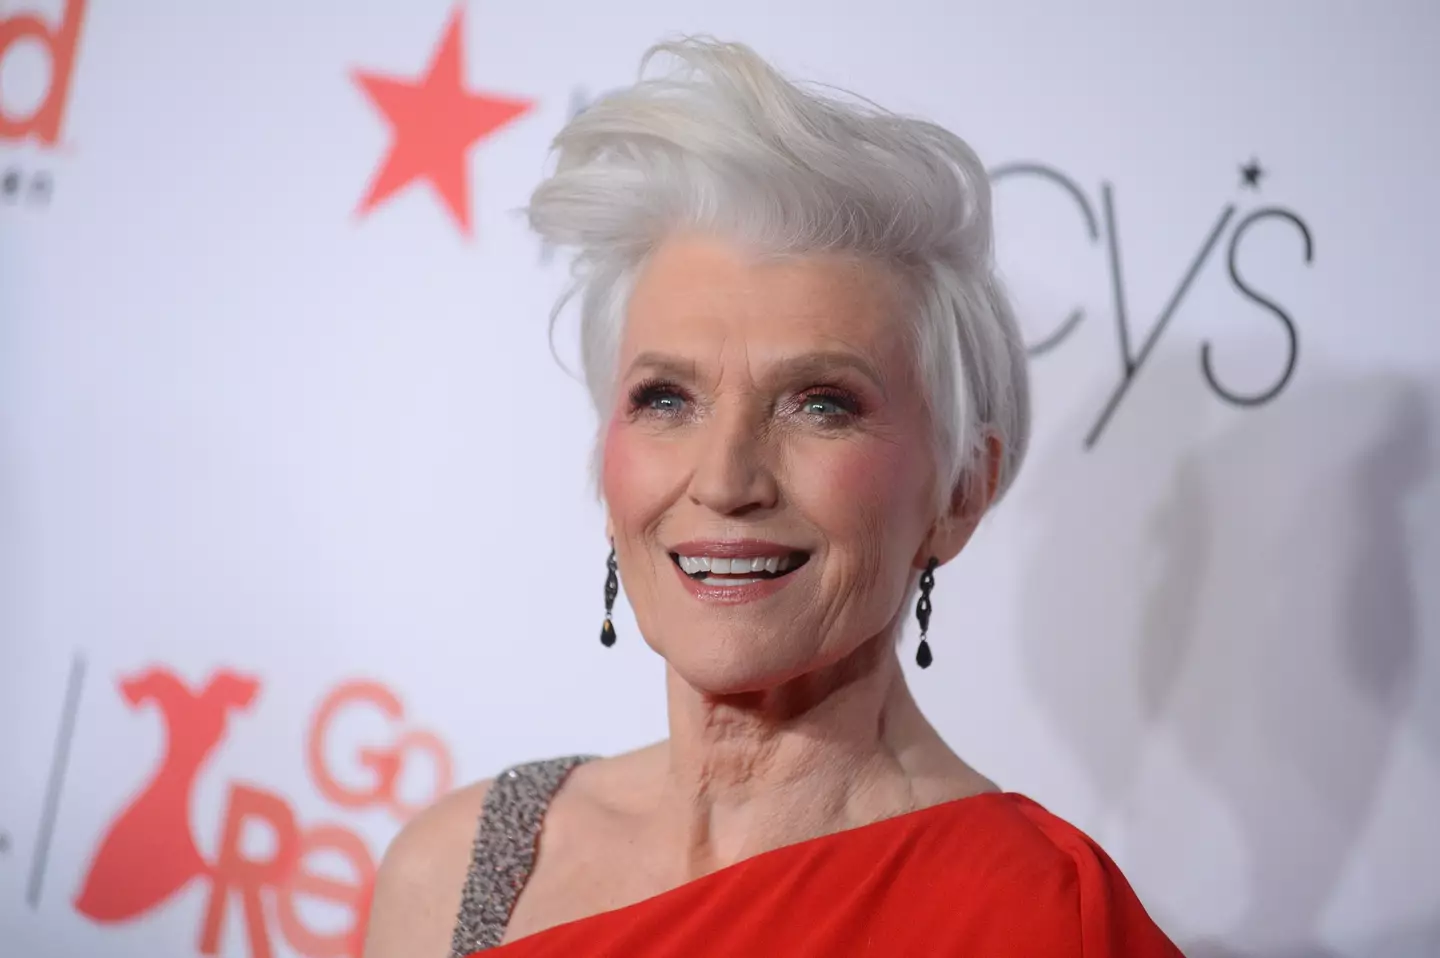 Maye Musk doesn't expect luxury at Elon's place.